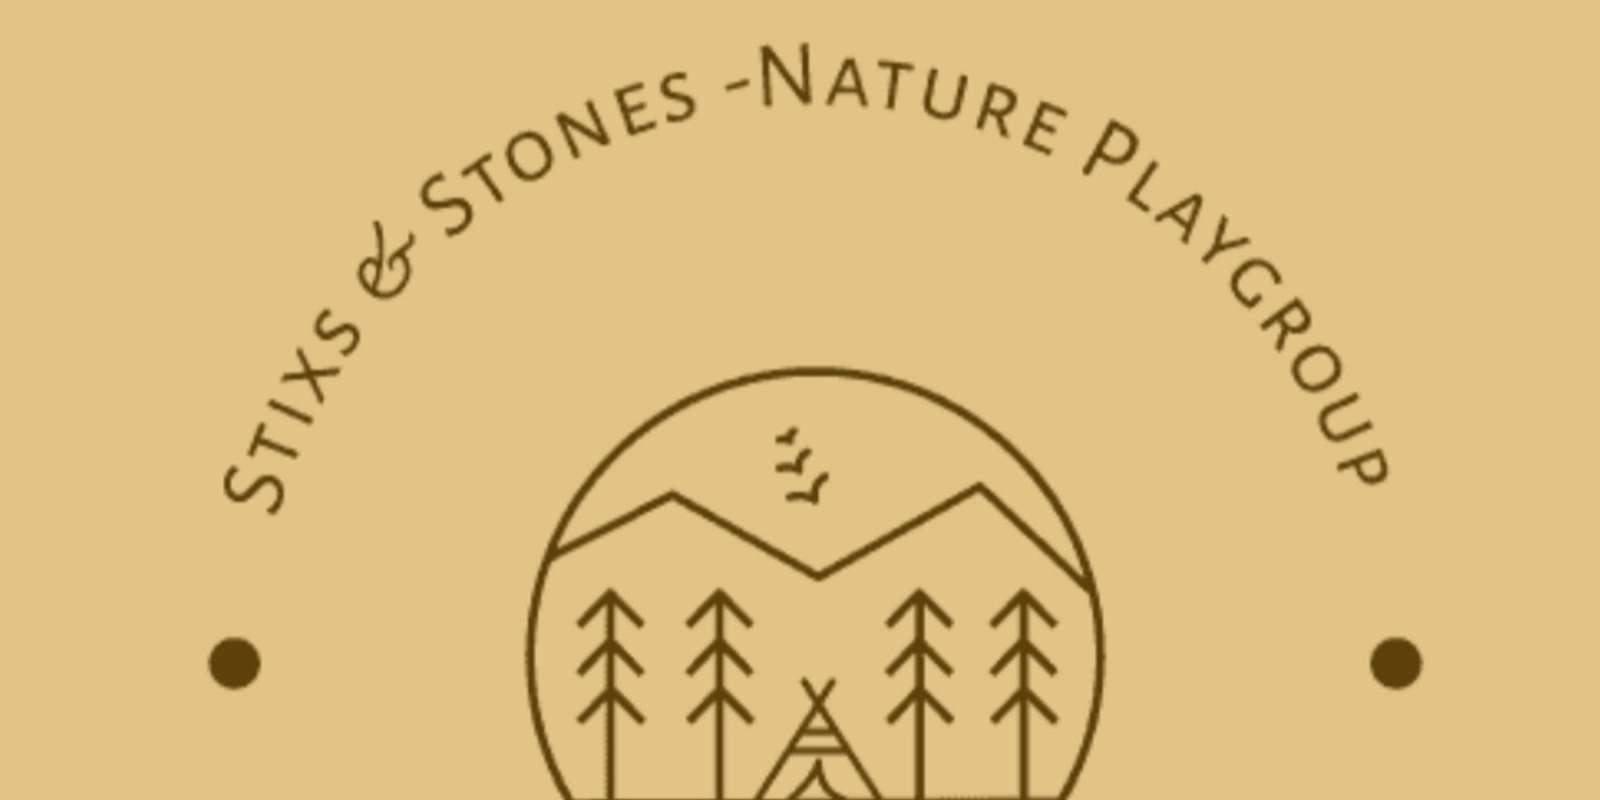 Banner image for Stixs & Stones- Nature Playgroup